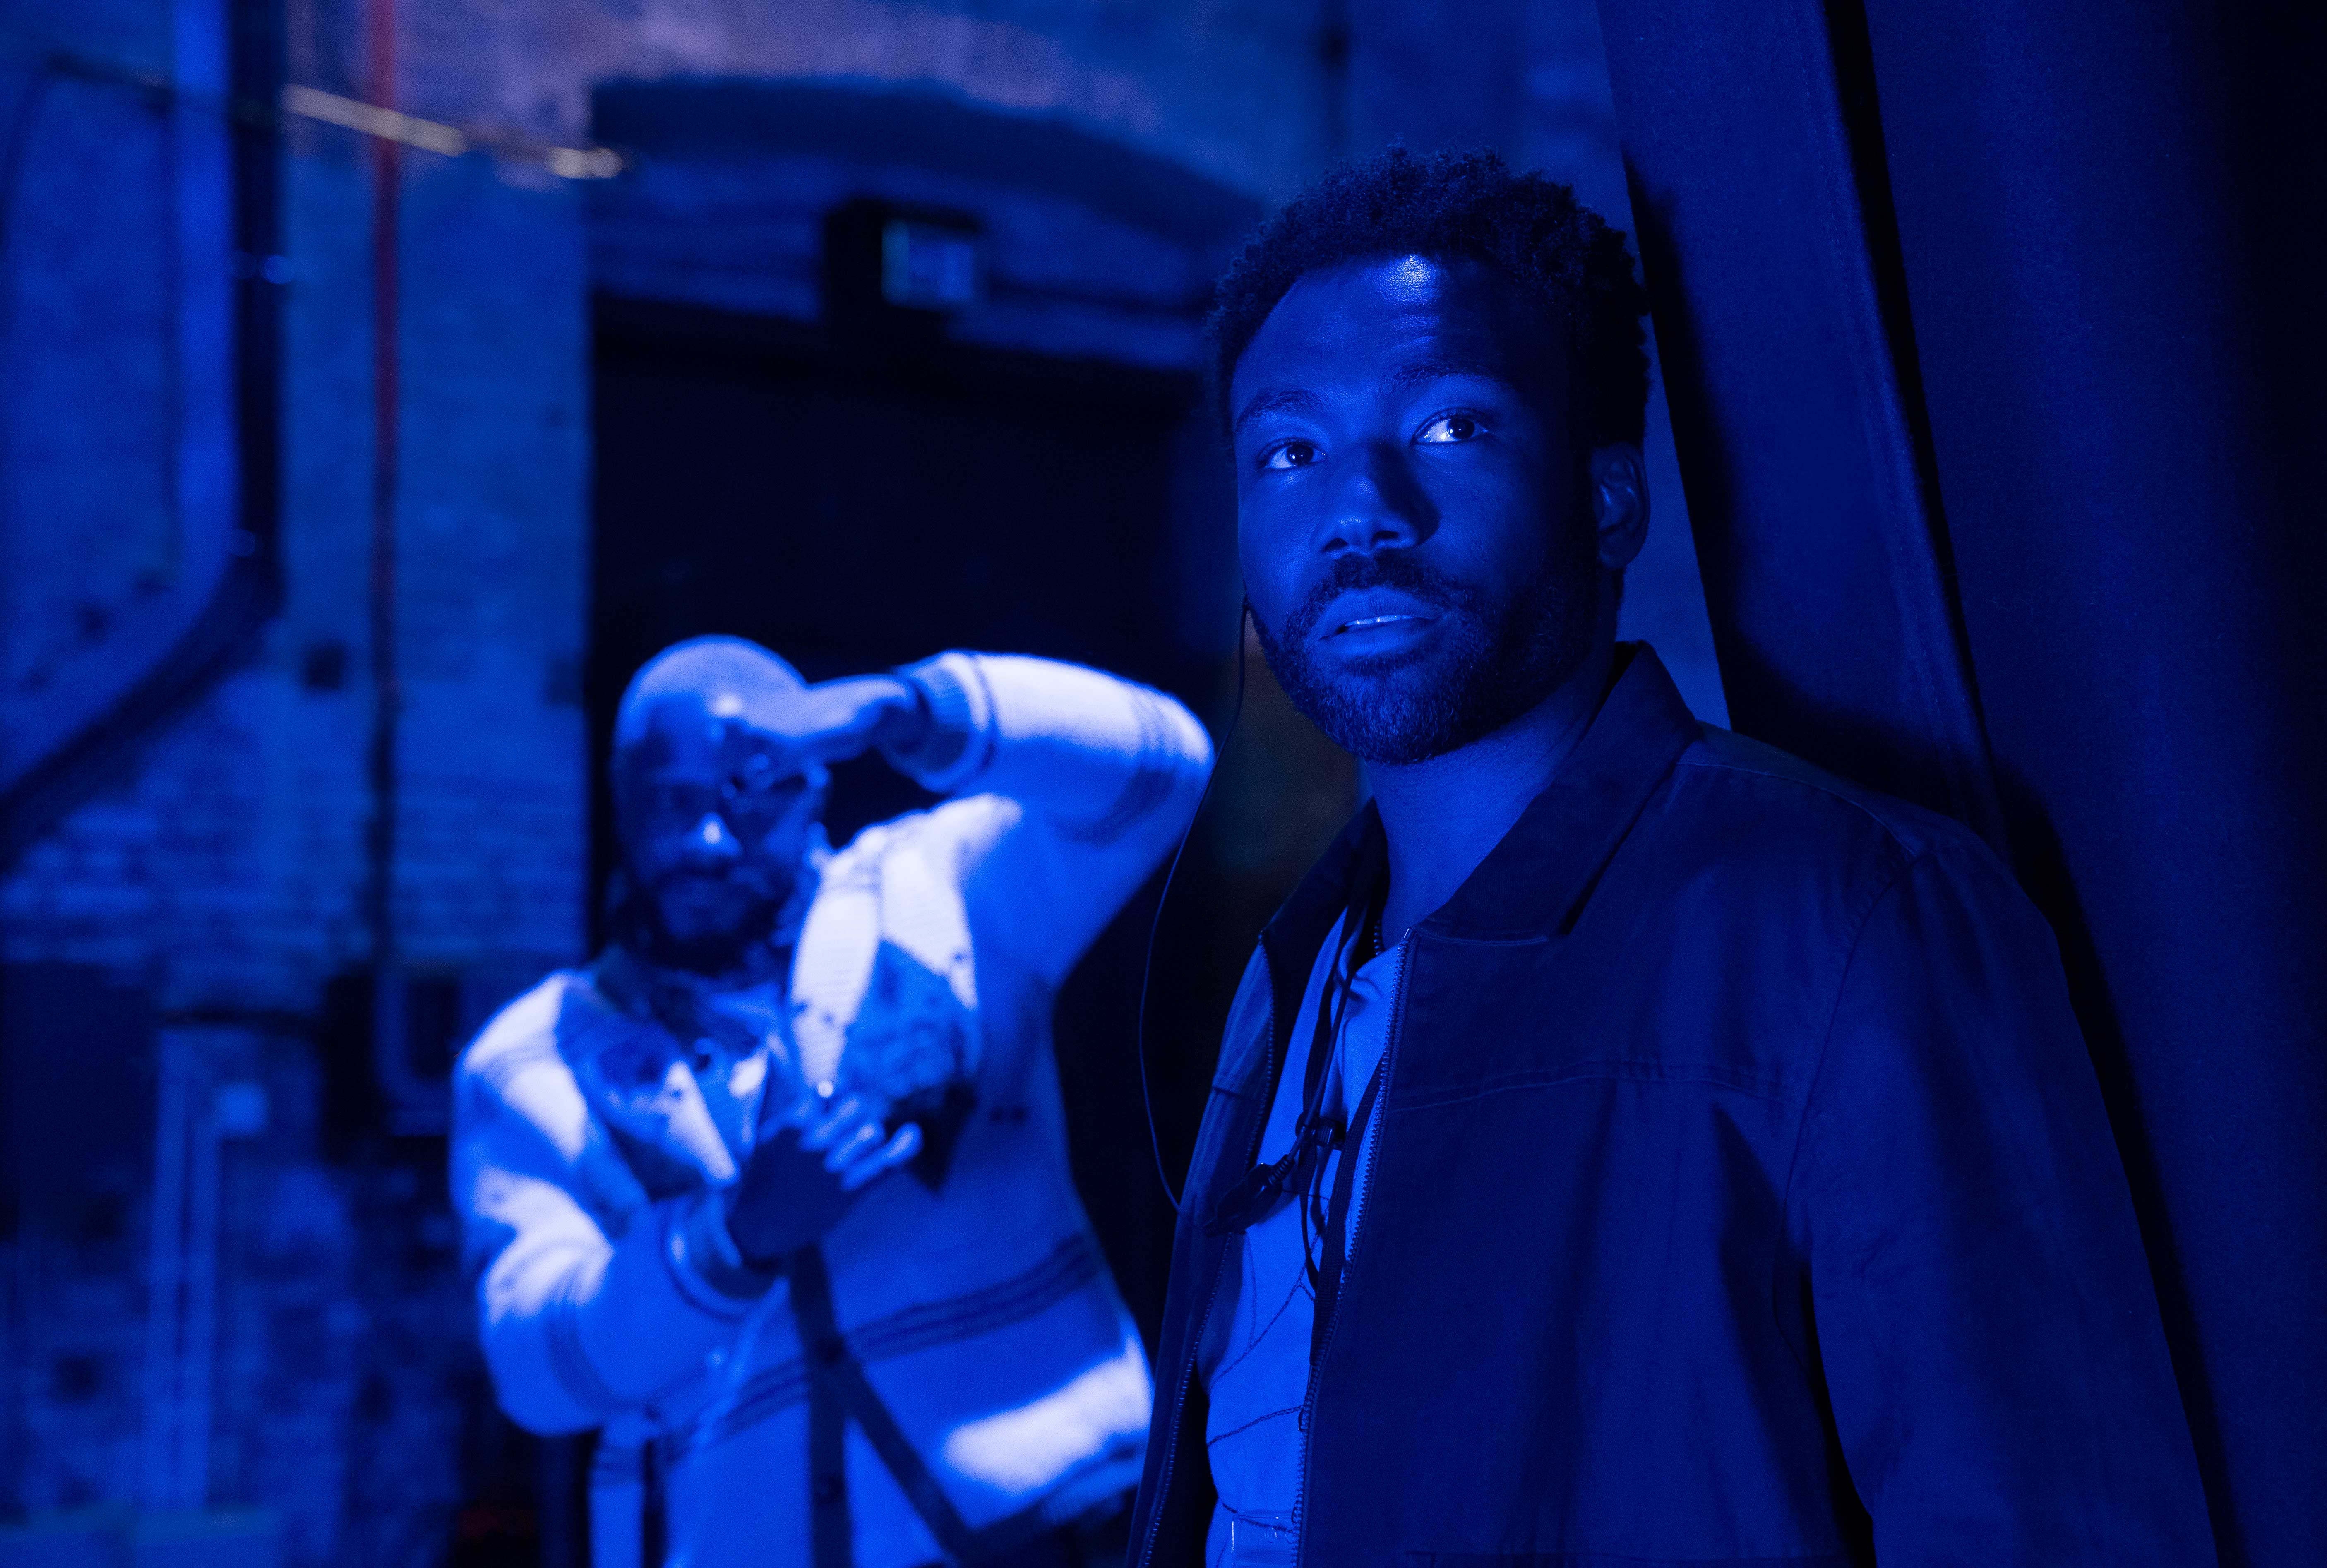 LaKeith Stanfield and Donald Glover in Donald Glover's FX surreal comedy-drama series, Atlanta, Season 3 Episode 5